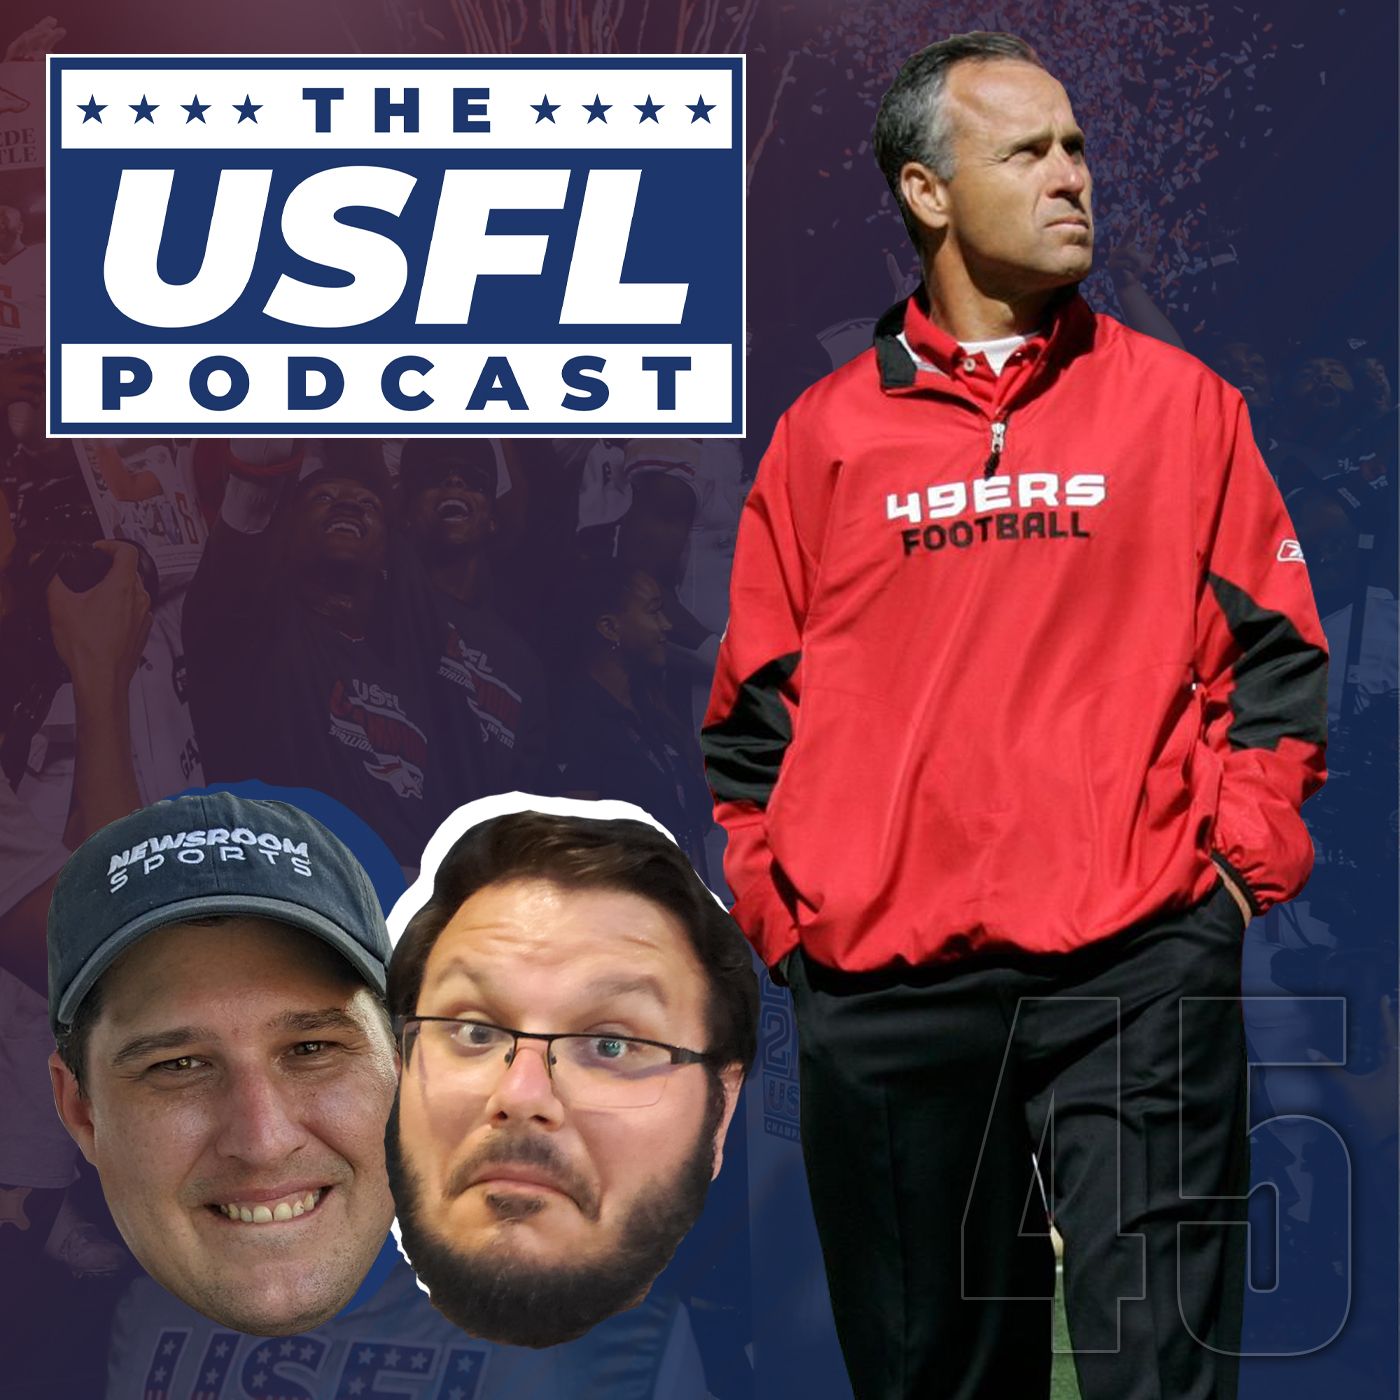 Mike Nolan Replaces Jeff Fisher as HC of the Michigan Panthers | USFL Podcast #45